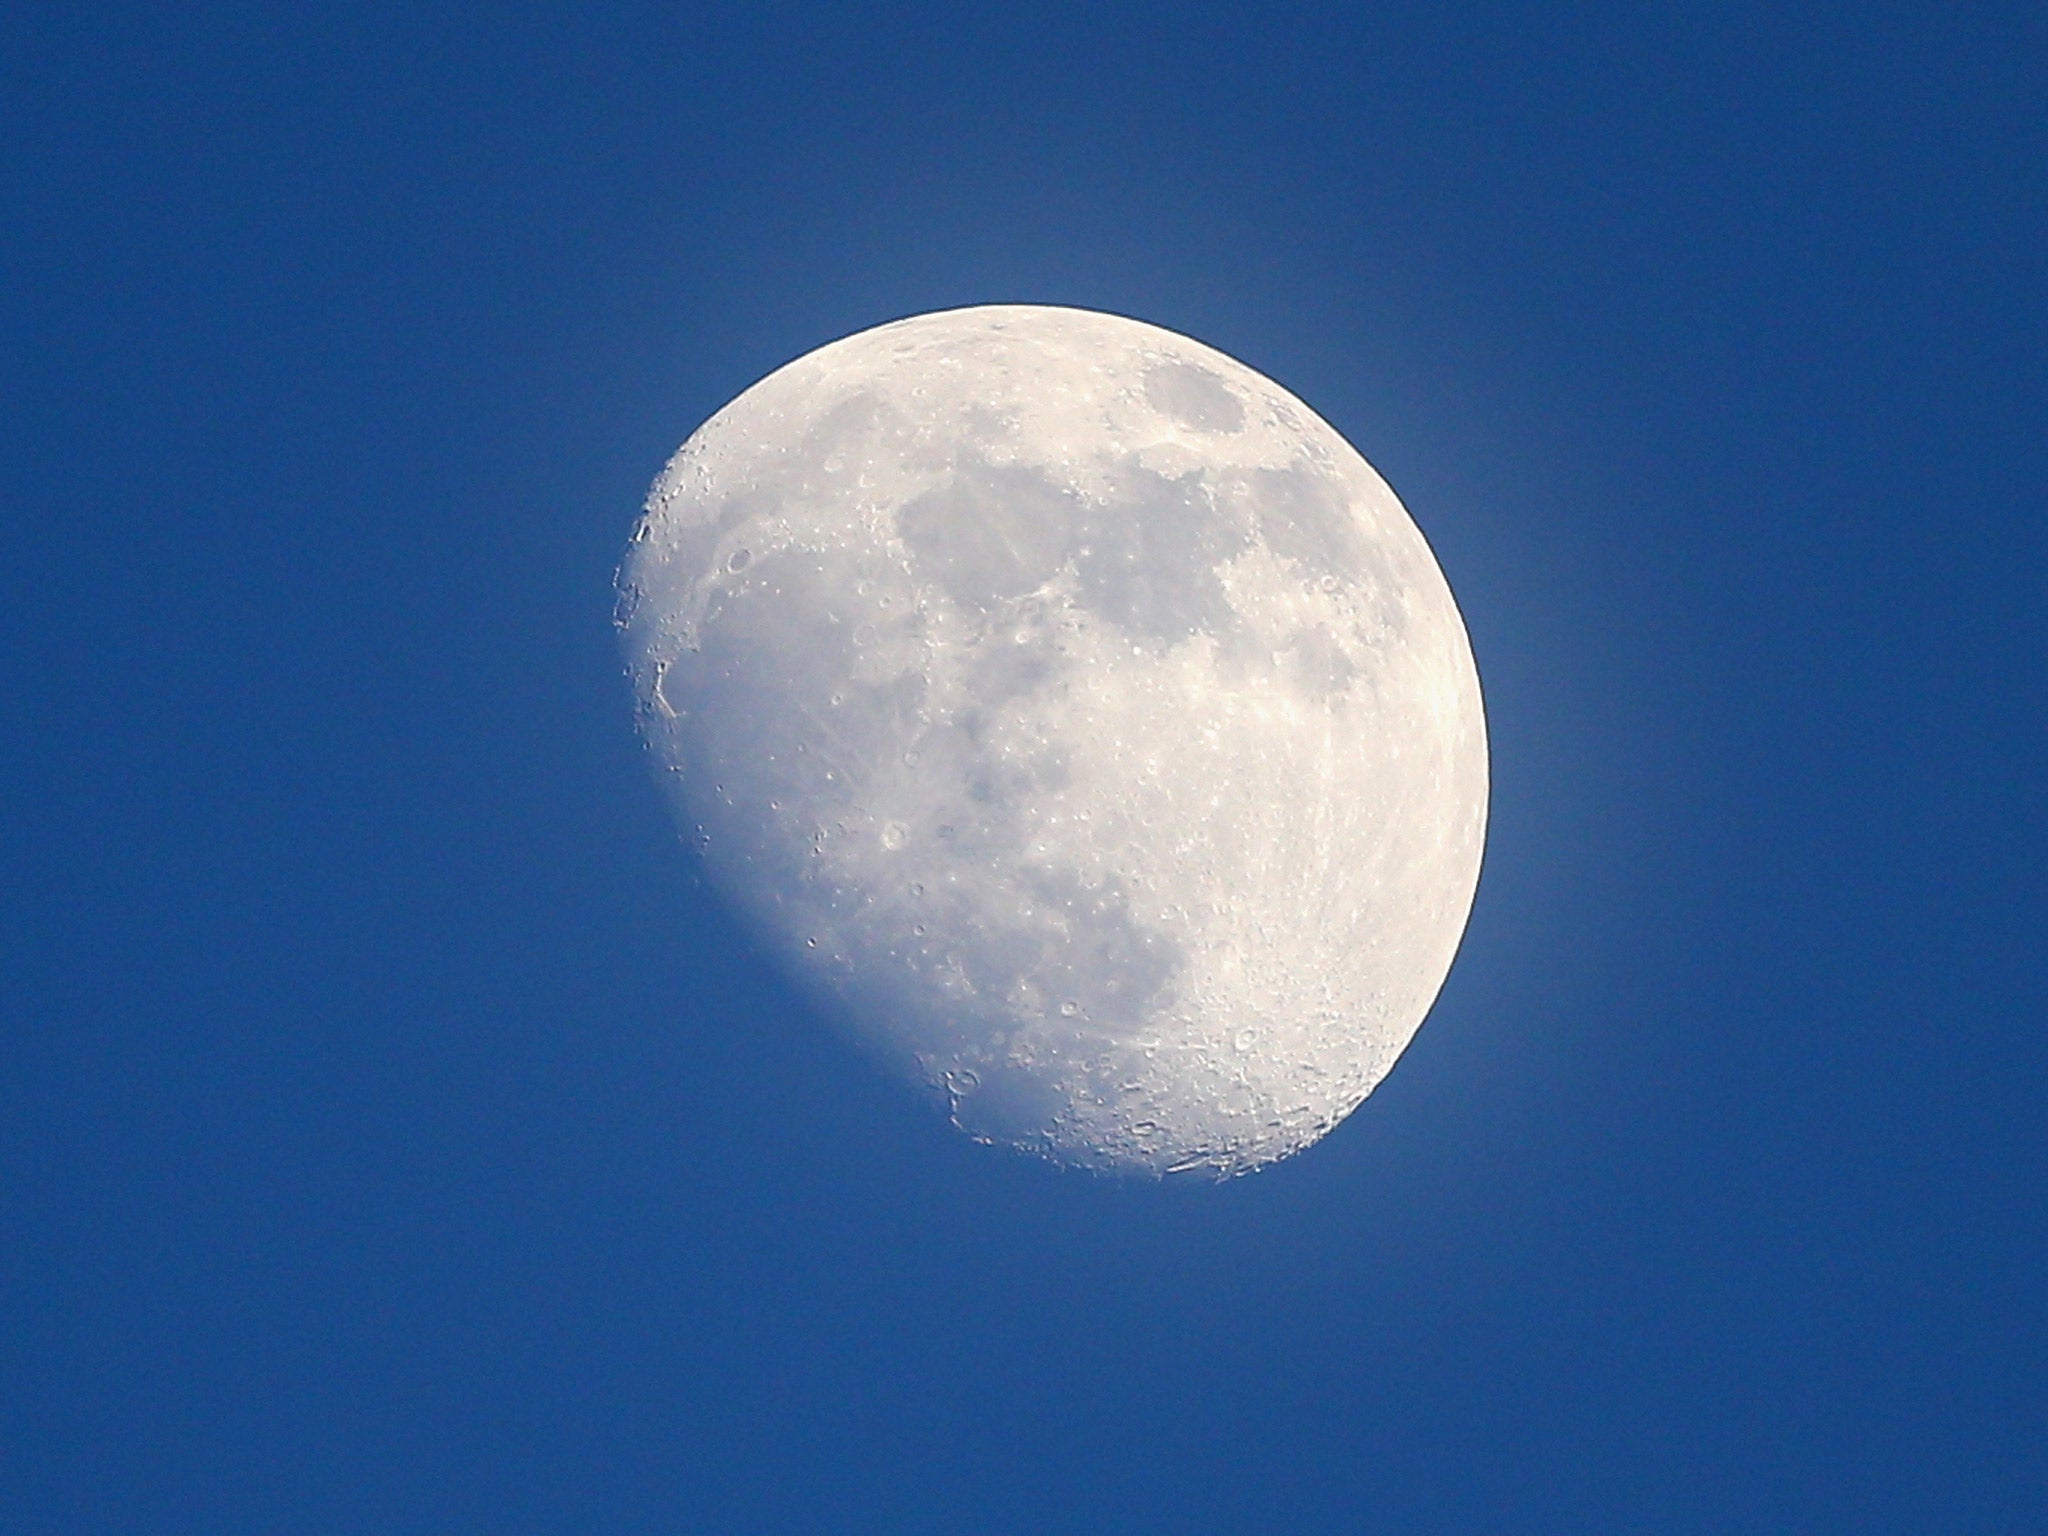 The Moon causes the Earth’s atmosphere to bulge towards it when it is overhead